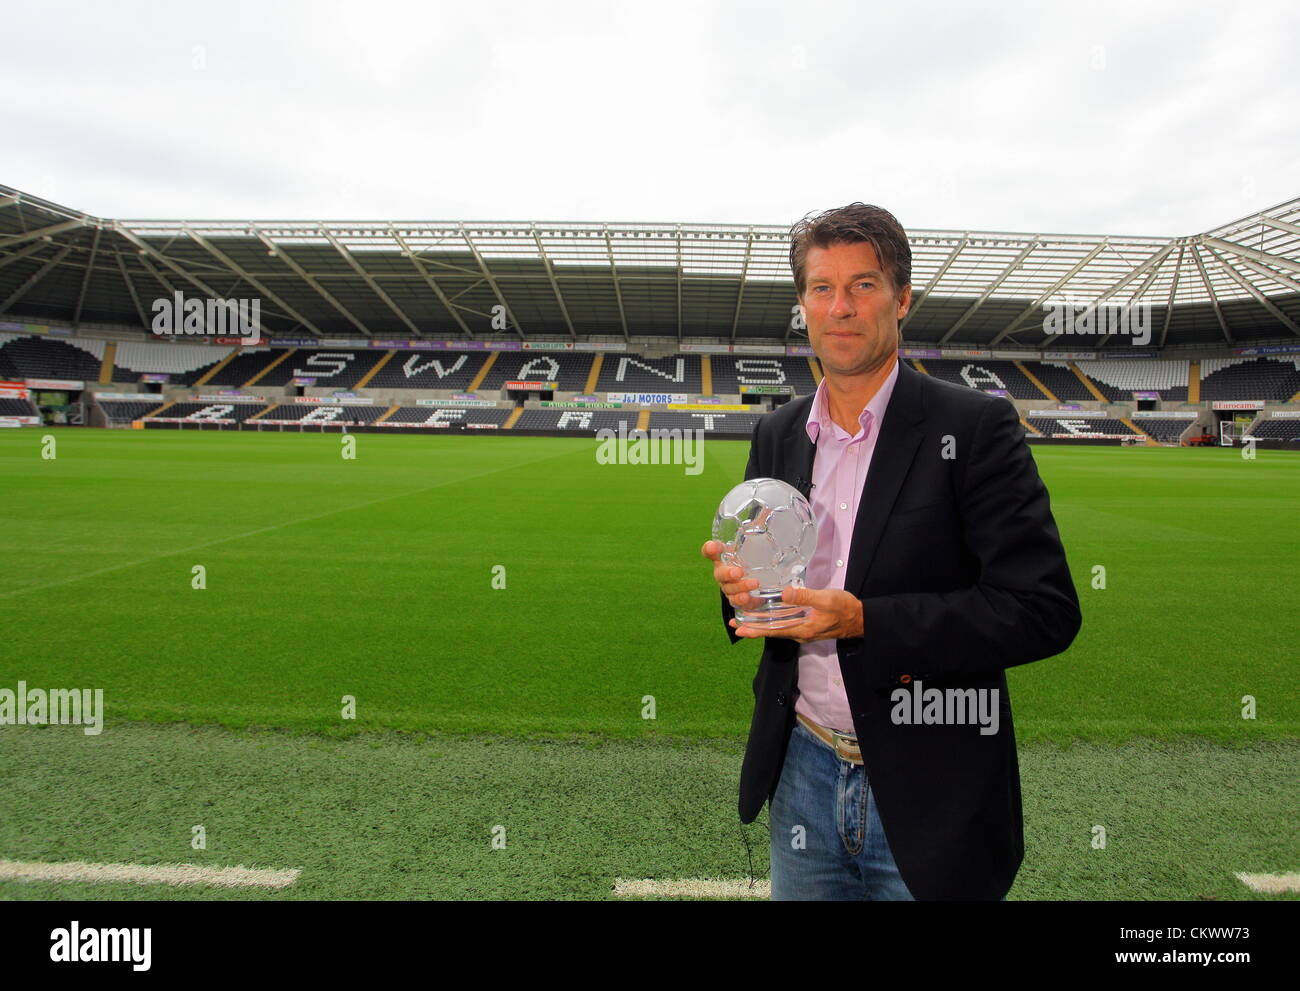 Pictured: Swansea manager Michael Laudrup with the F&C Investments League Managers Association  (LMA)performance of the week award for his team's performance against Queens Park Rangers. Thursday 23 August 2012  Re: Barclay's Premier League side Swansea City FC press conference at the Liberty Stadium, south Wales, UK. Stock Photo